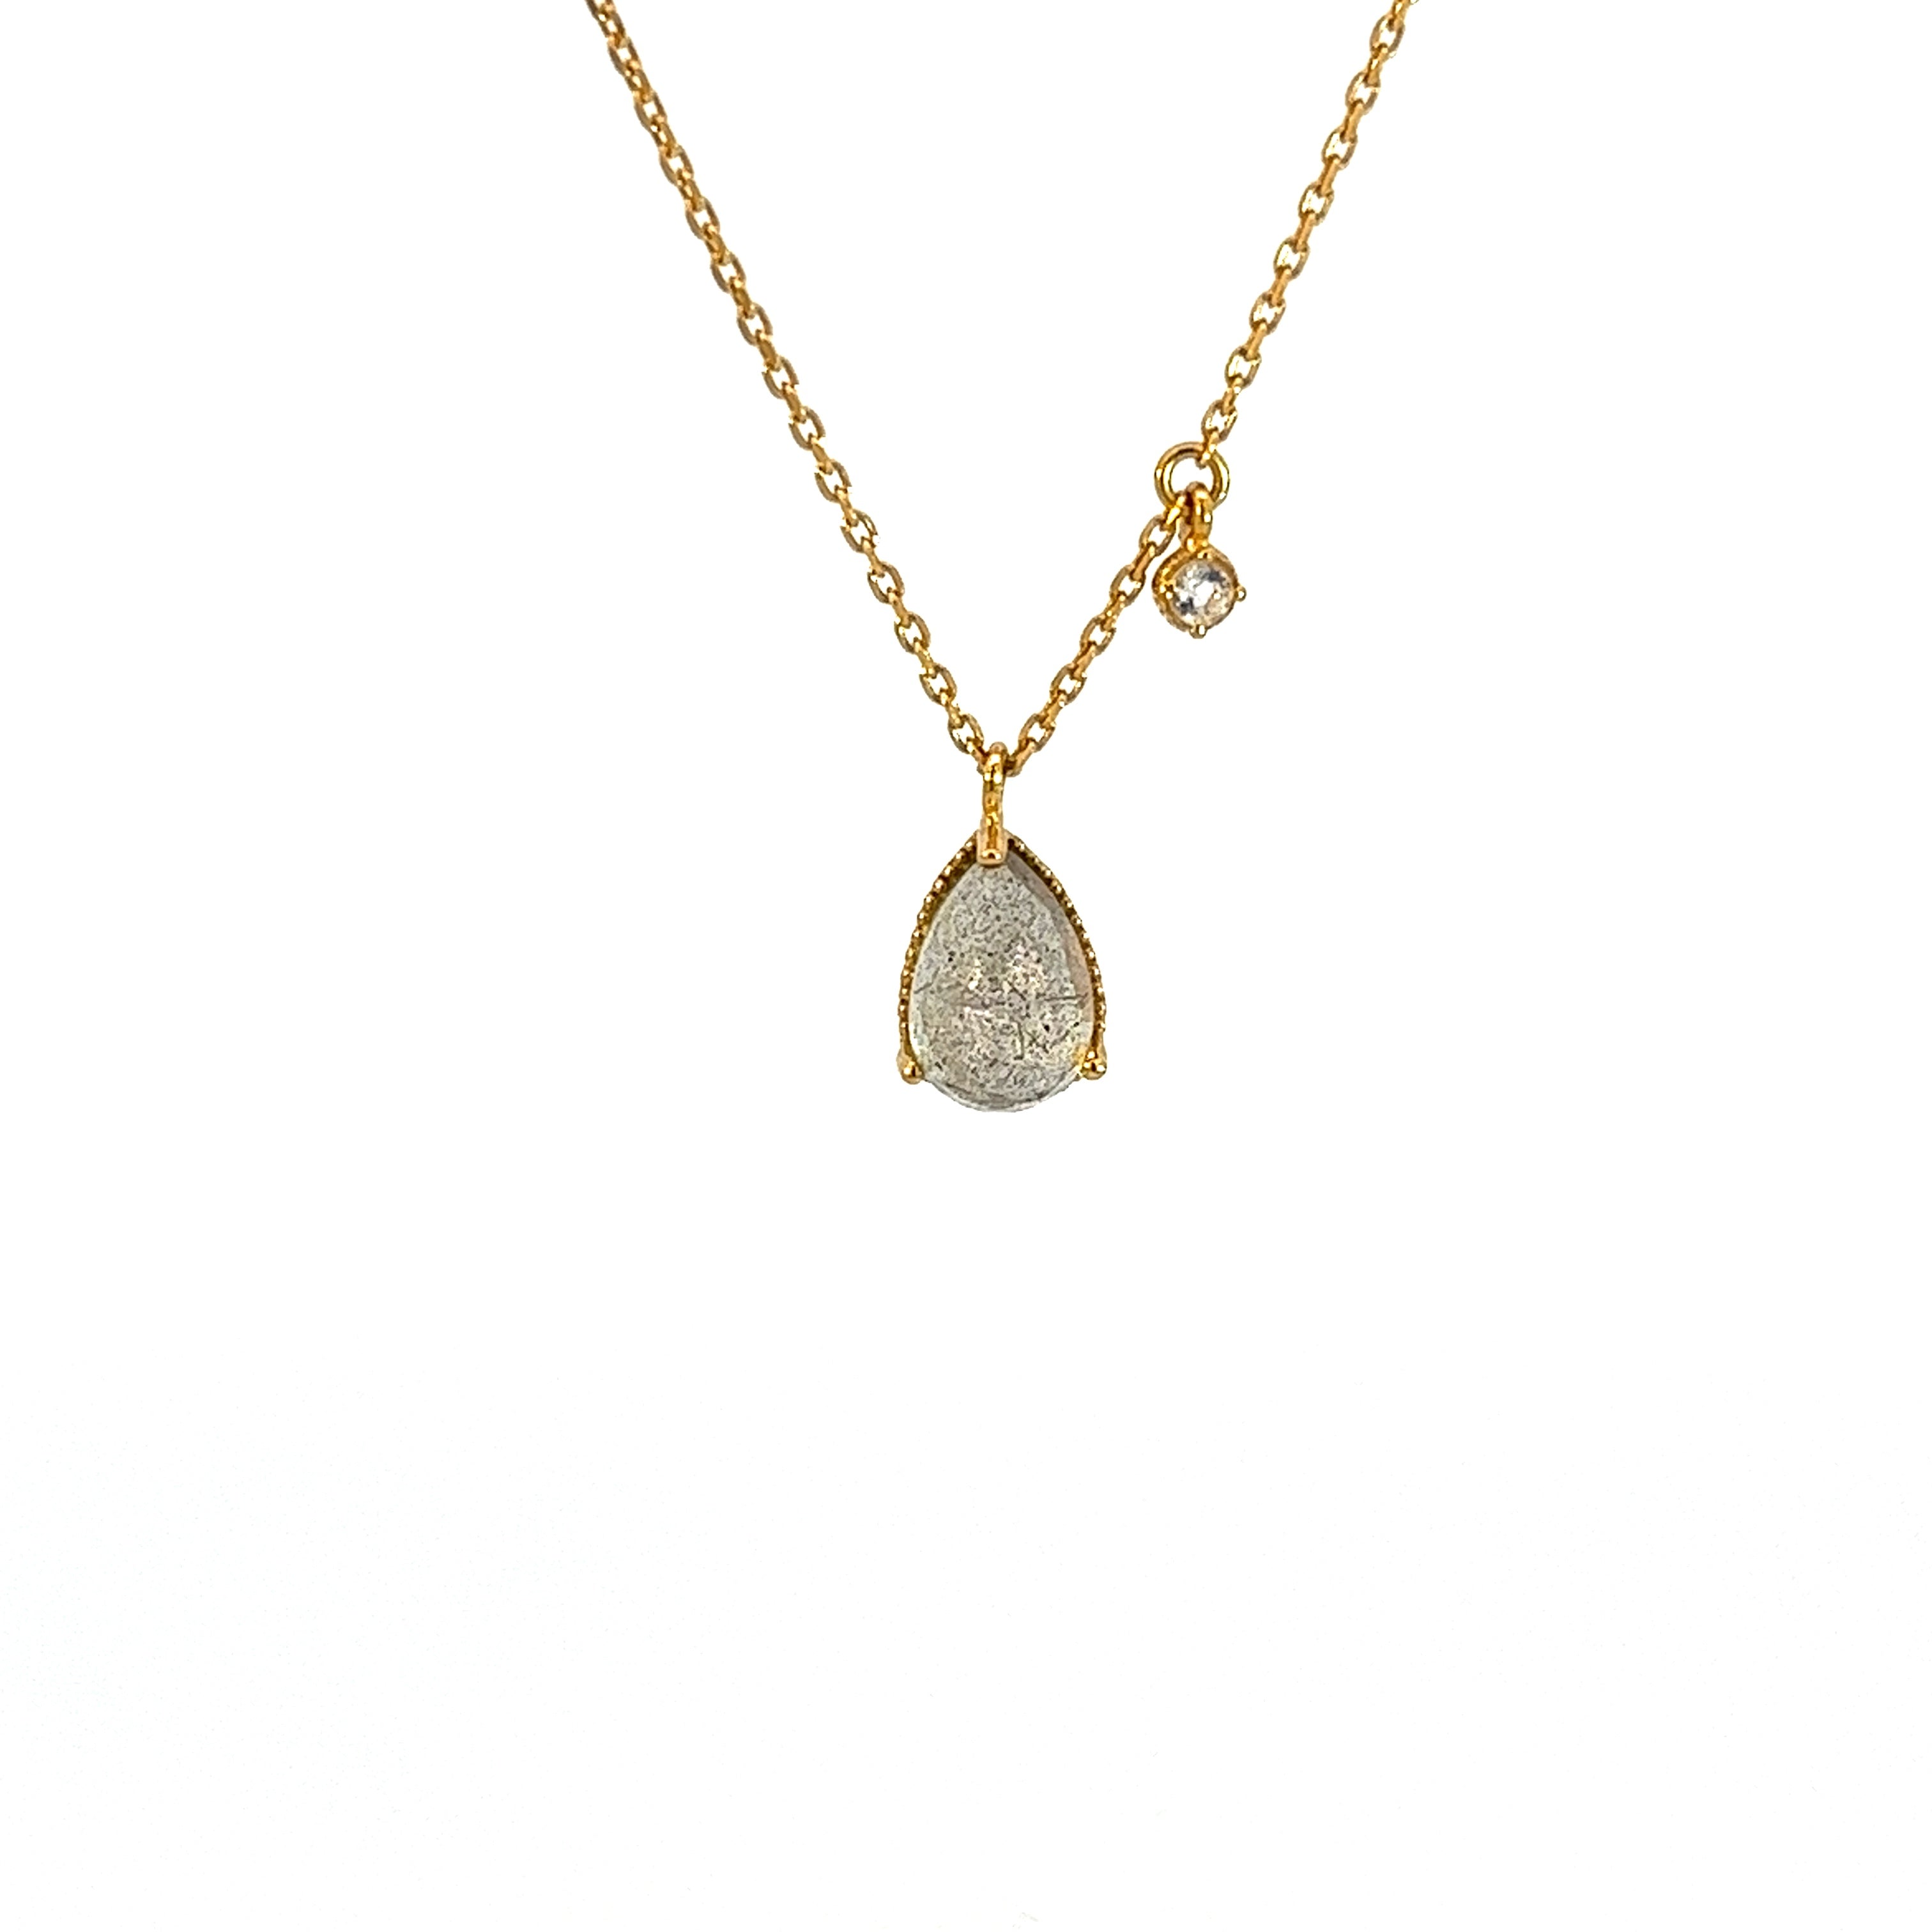 DROP PENDANT WITH LABRADORITE AND MOONSTONE SET IN 925 SILVER GOLD PLATED